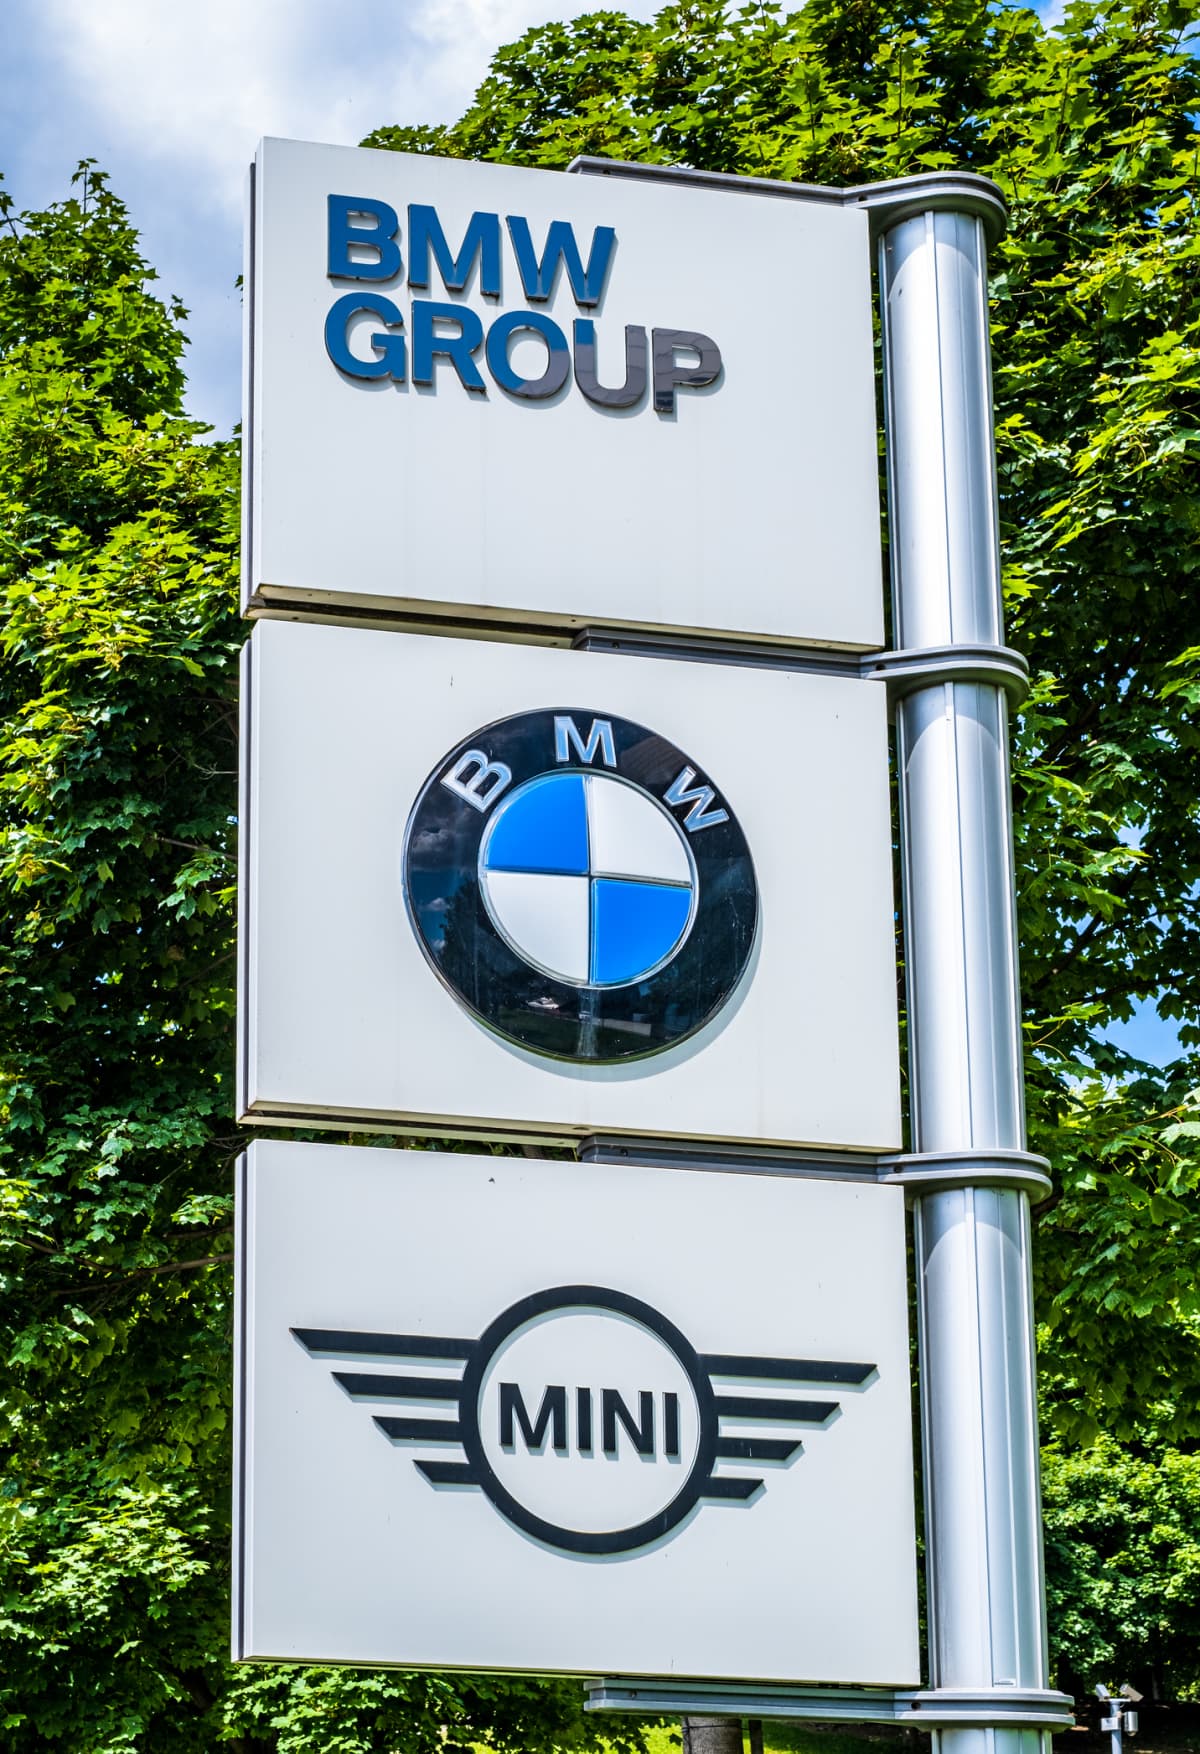 LUHANSK, UKRAINE - 2013/06/09: BMW car company logo in front of dealership building. Bayerische Motoren Werke AG (English: Bavarian Motor Works), commonly known as BMW, is a German automobile, motorcycle and engine manufacturing company founded in 1917. BMW is headquartered in Munich, Bavaria. (Photo by Igor Golovniov/SOPA Images/LightRocket via Getty Images)